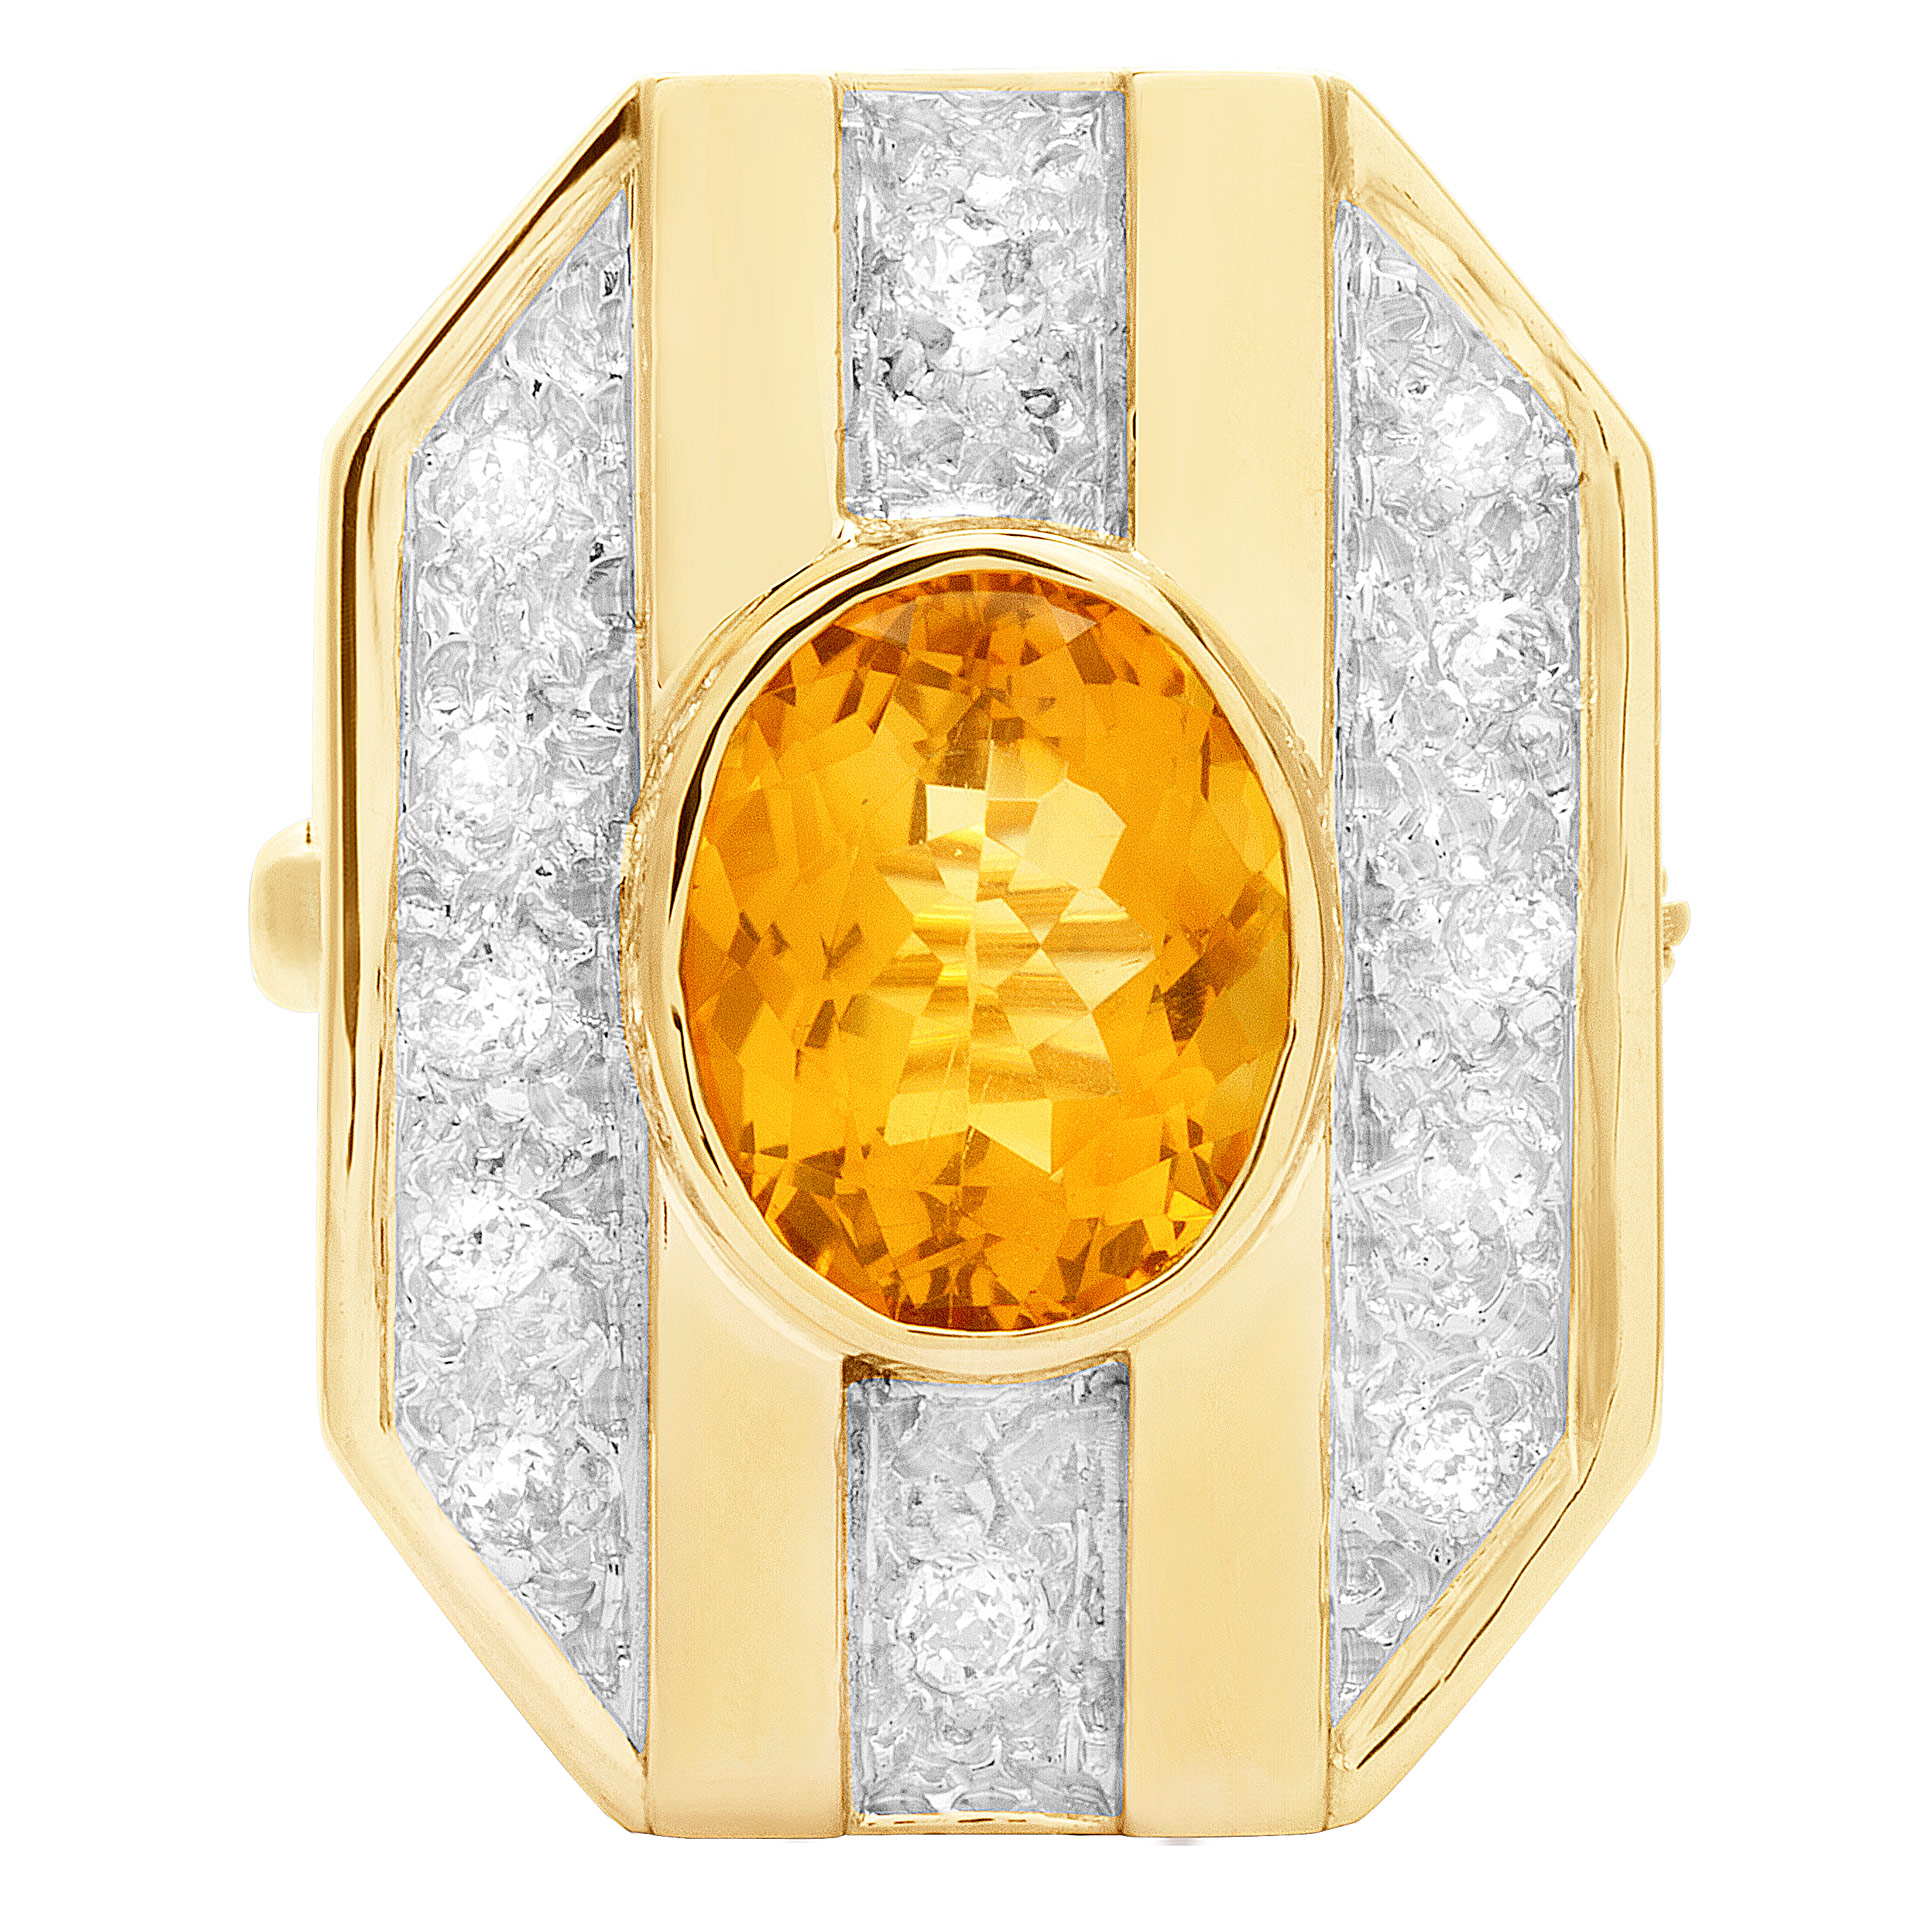 Brooch/Enhancer with citrine & diamond accents in 14k yellow gold. Approx. 1 carat in diamonds image 1